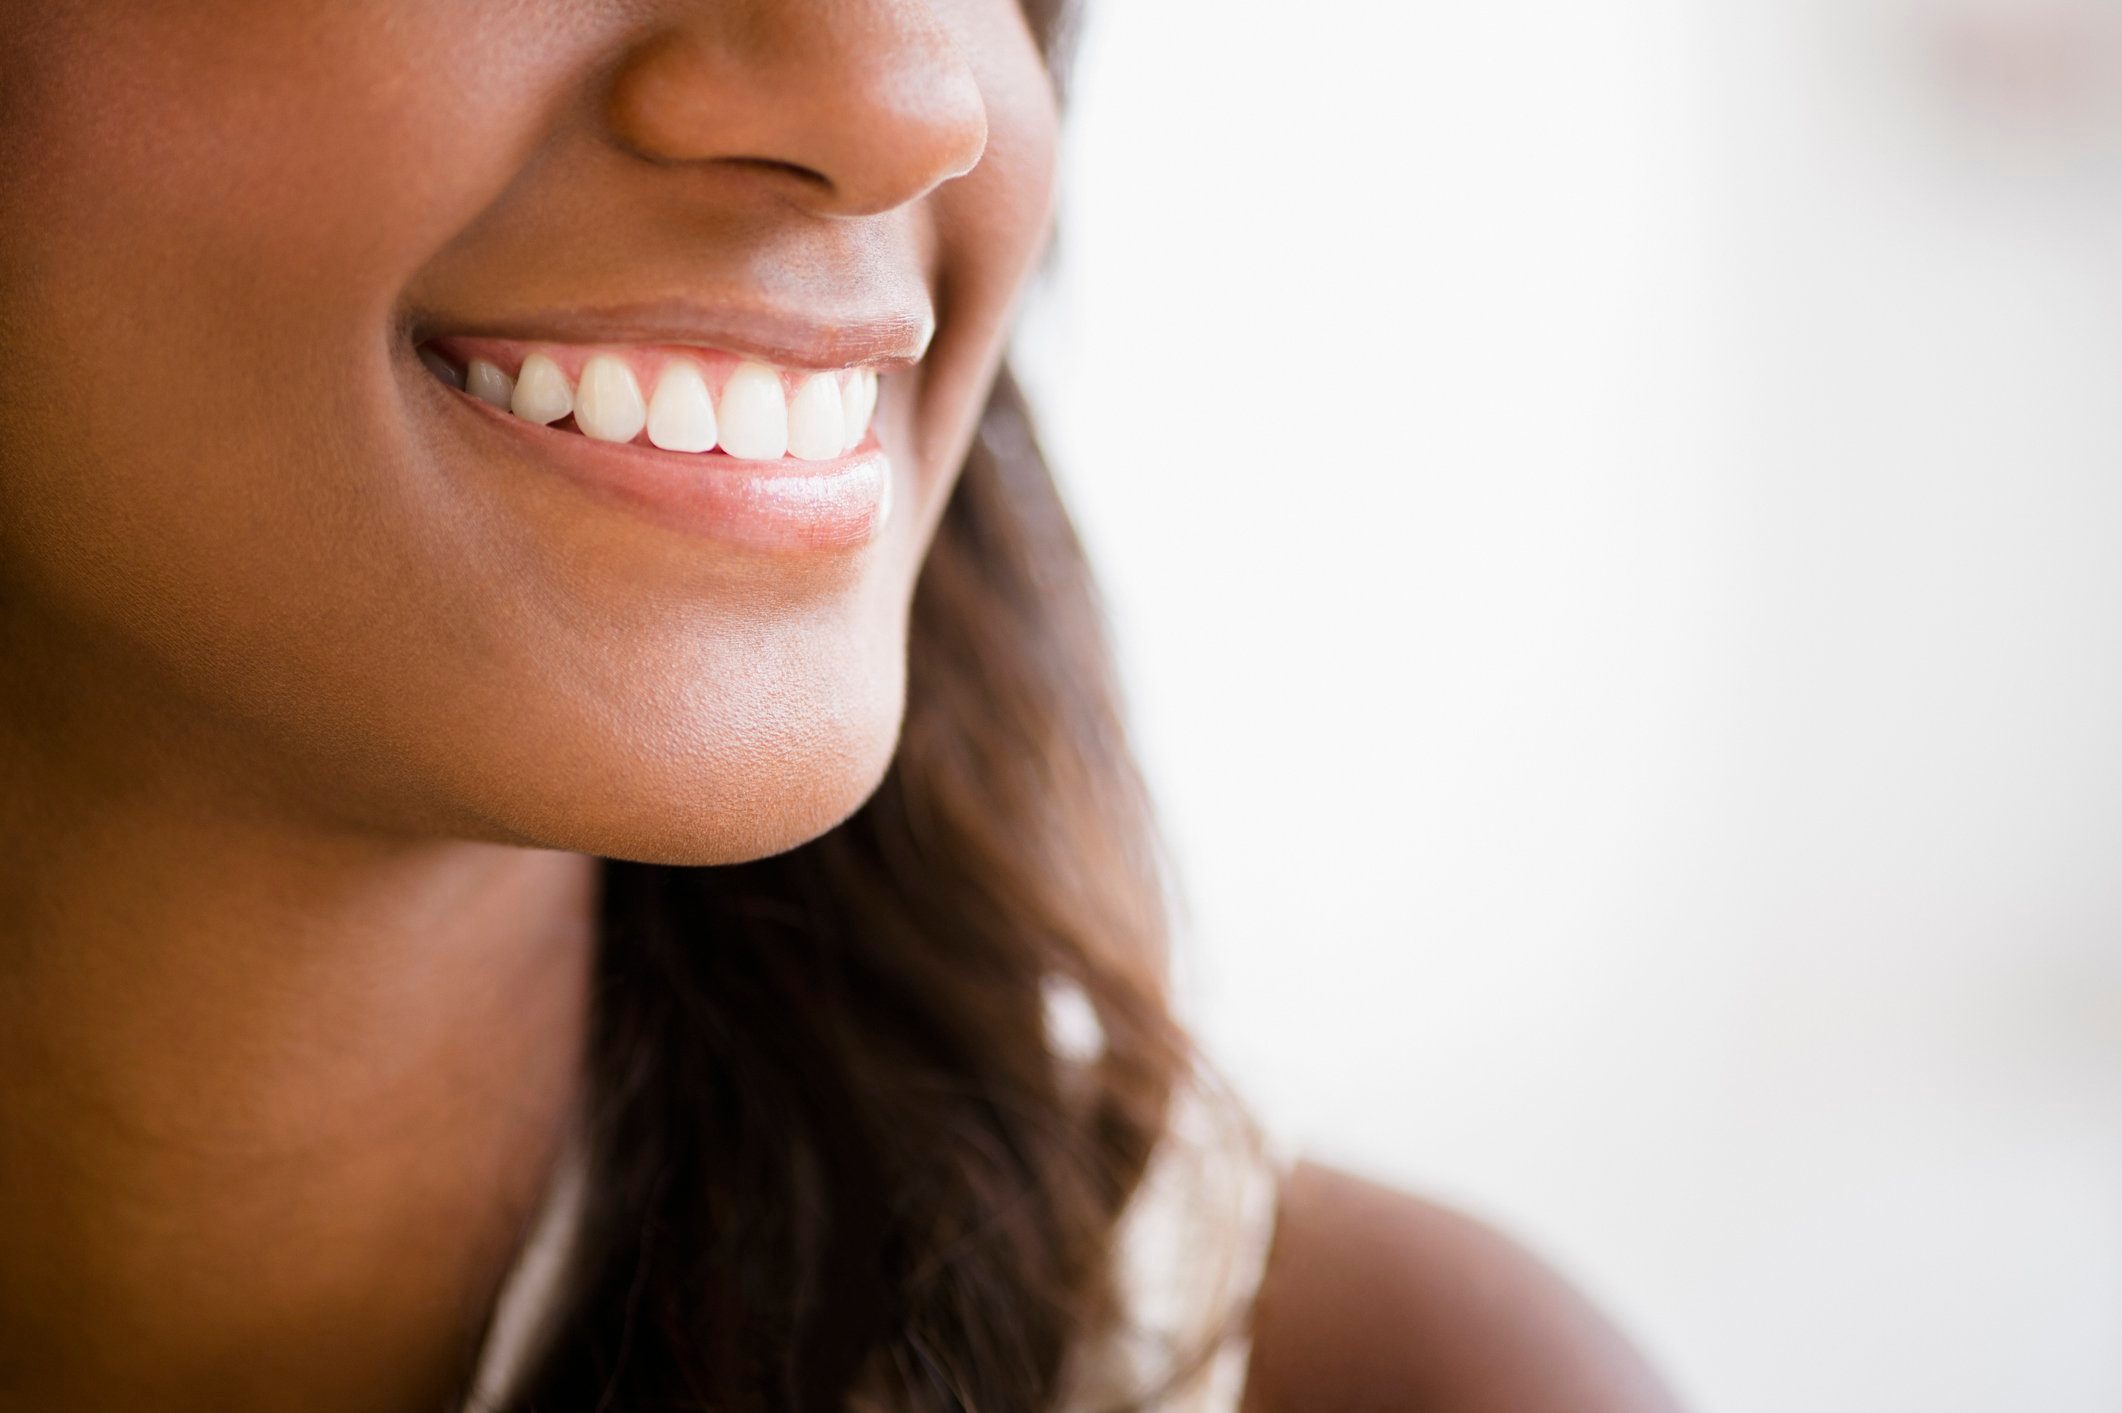 close up of woman's smile